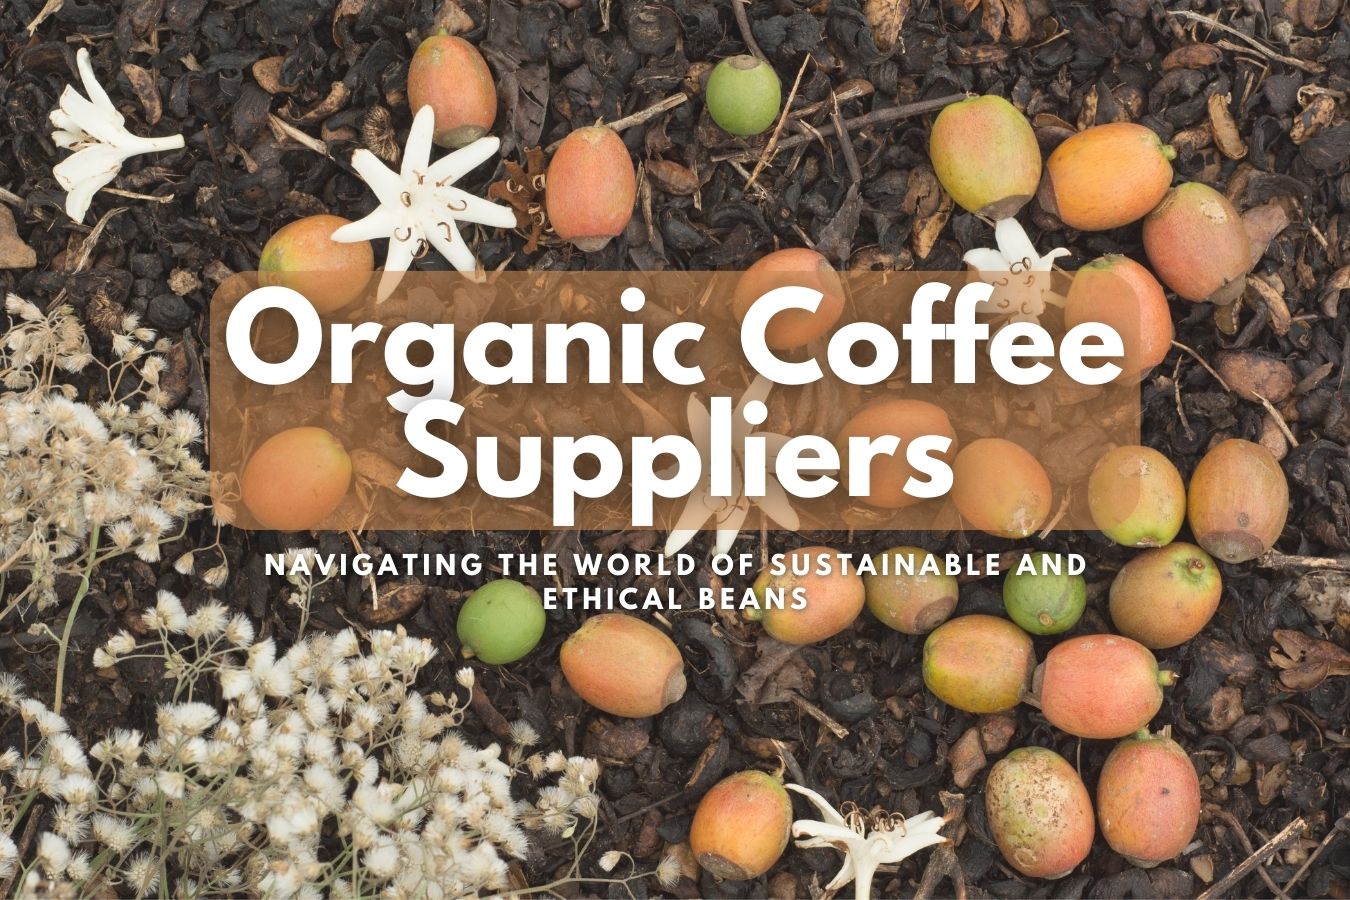 Organic Coffee Suppliers Navigating the World of Sustainable and Ethical Beans